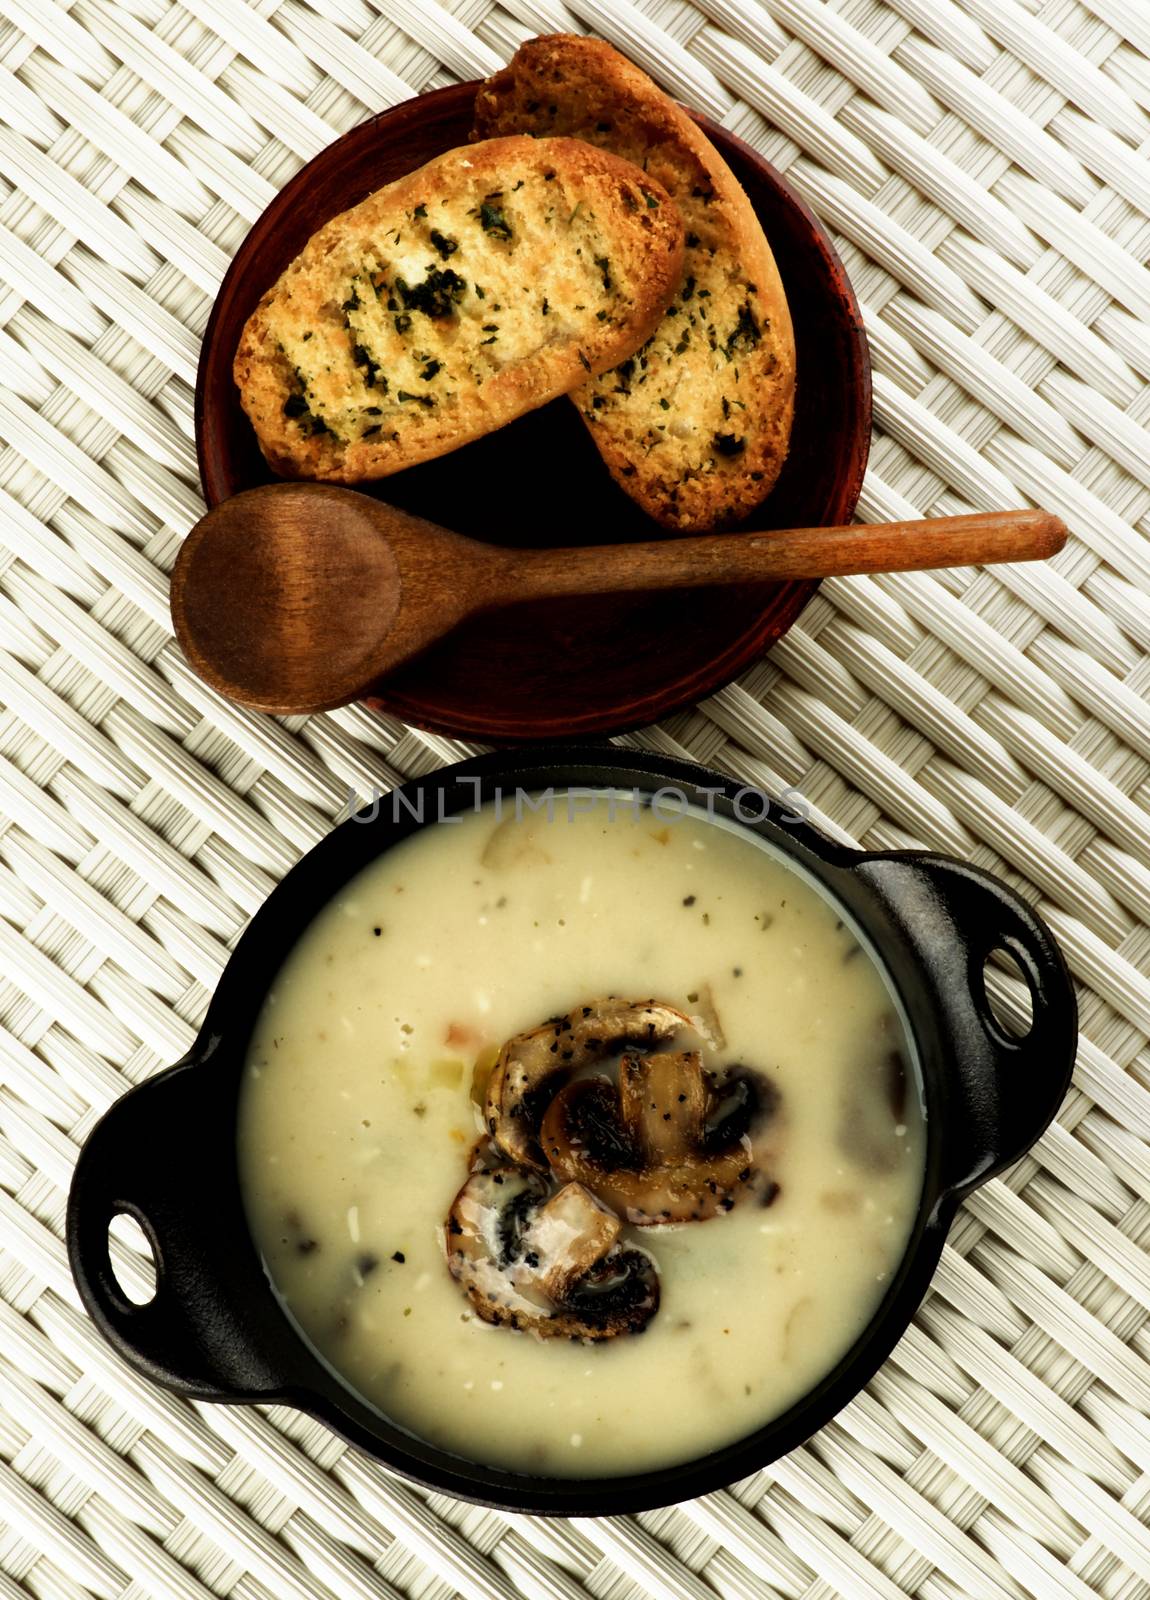 Delicious Homemade Mushrooms Cream Soup Decorated with Roasted Champignons in Black Iron Stewpot with Herb Crunchy Bread and Wooden Spoon closeup on Wicker background